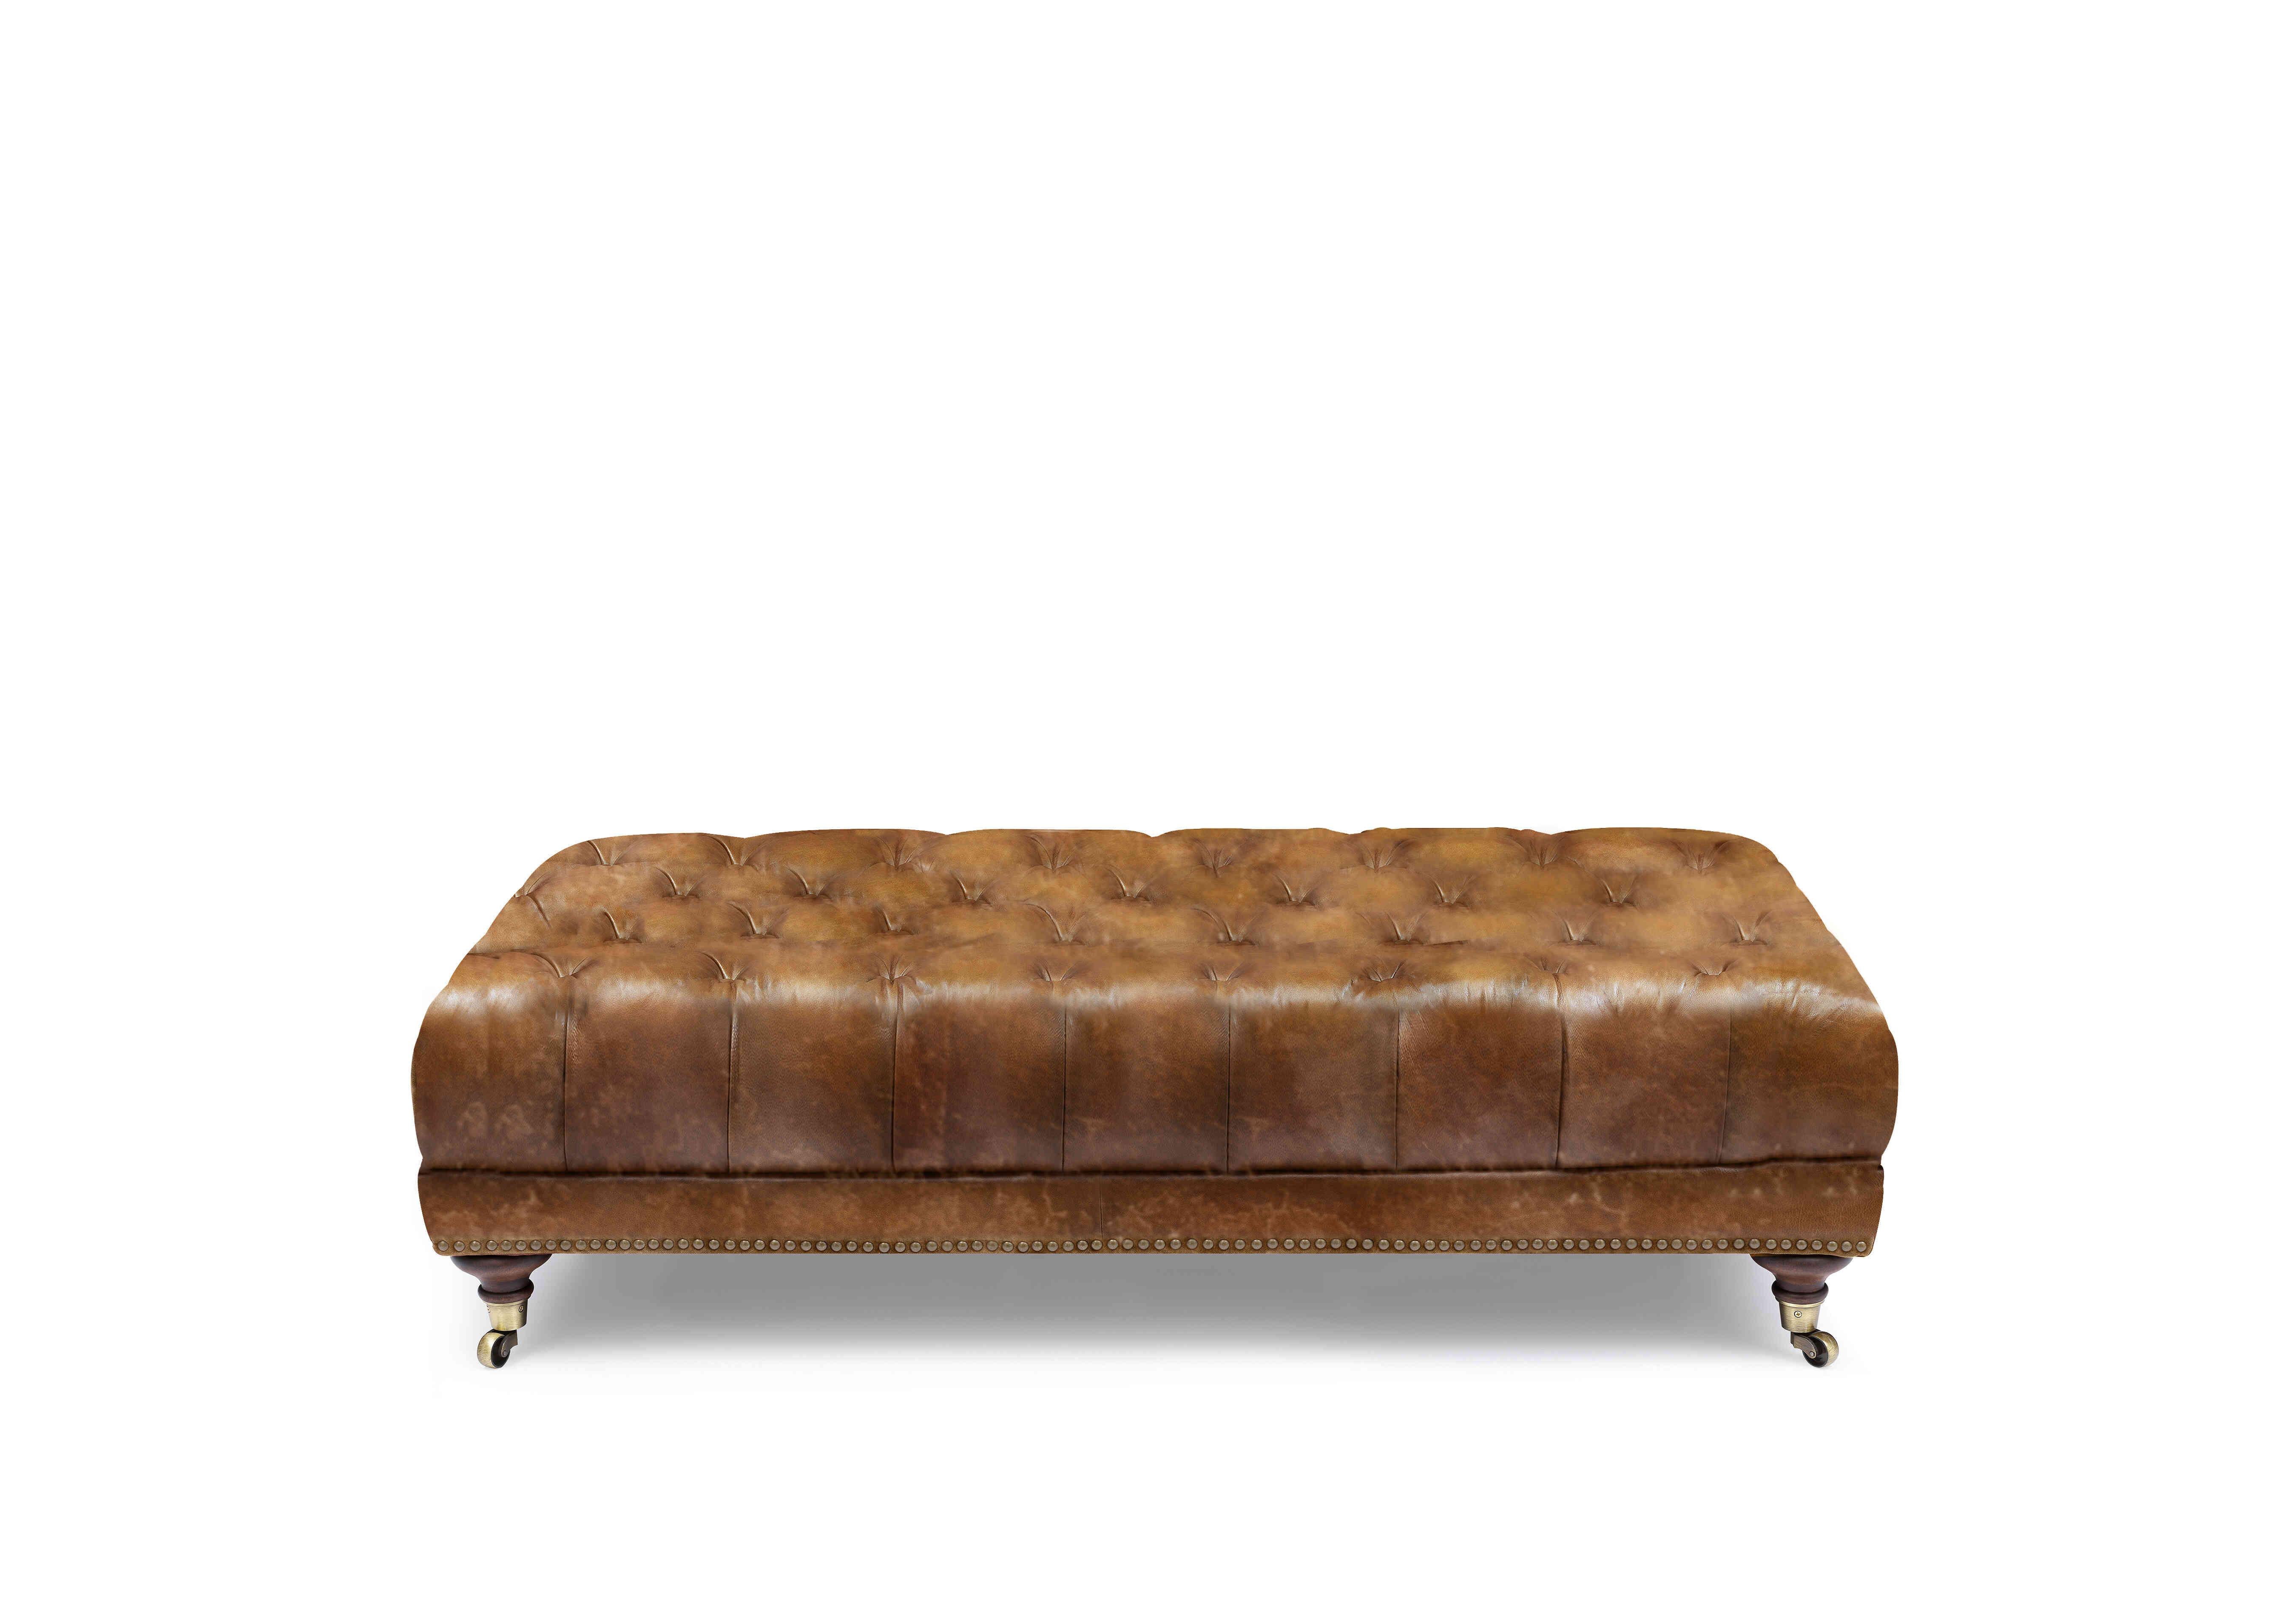 Wallace Leather Rectangular Footstool with Castors in X3y1-1981ls Saddle on Furniture Village